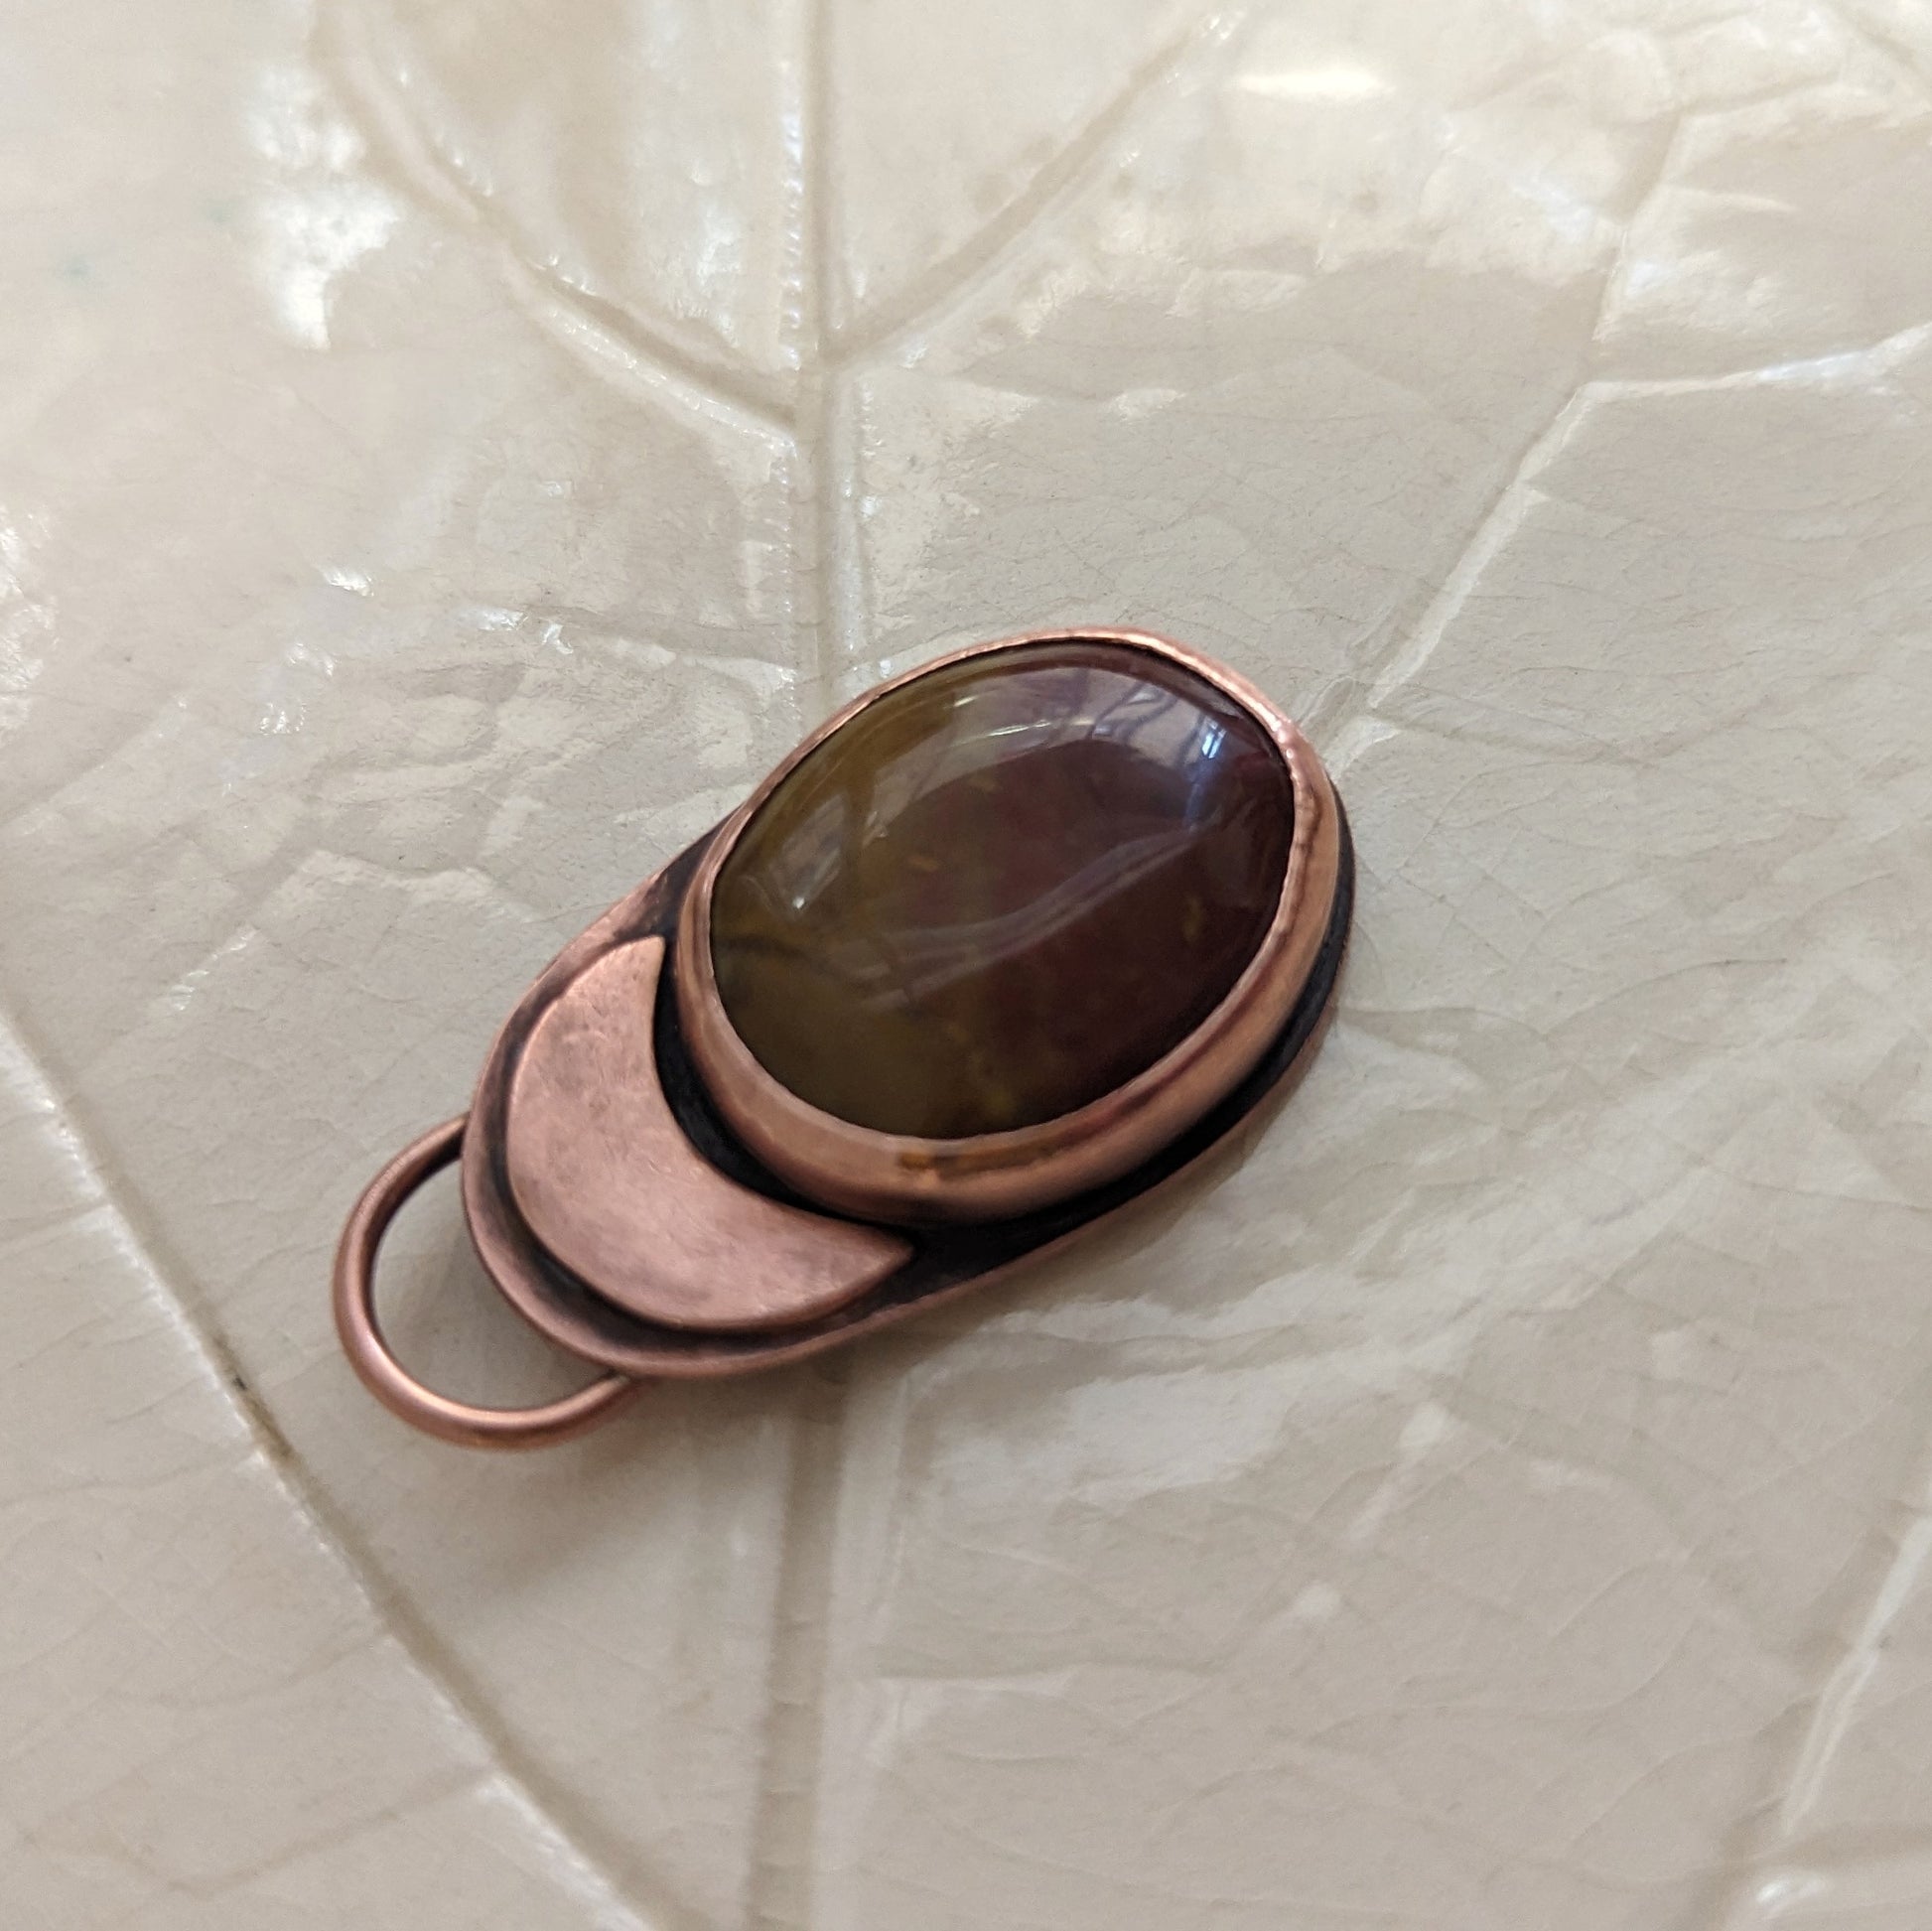 A deep red and ochre agate stone is set in copper under a copper moon.